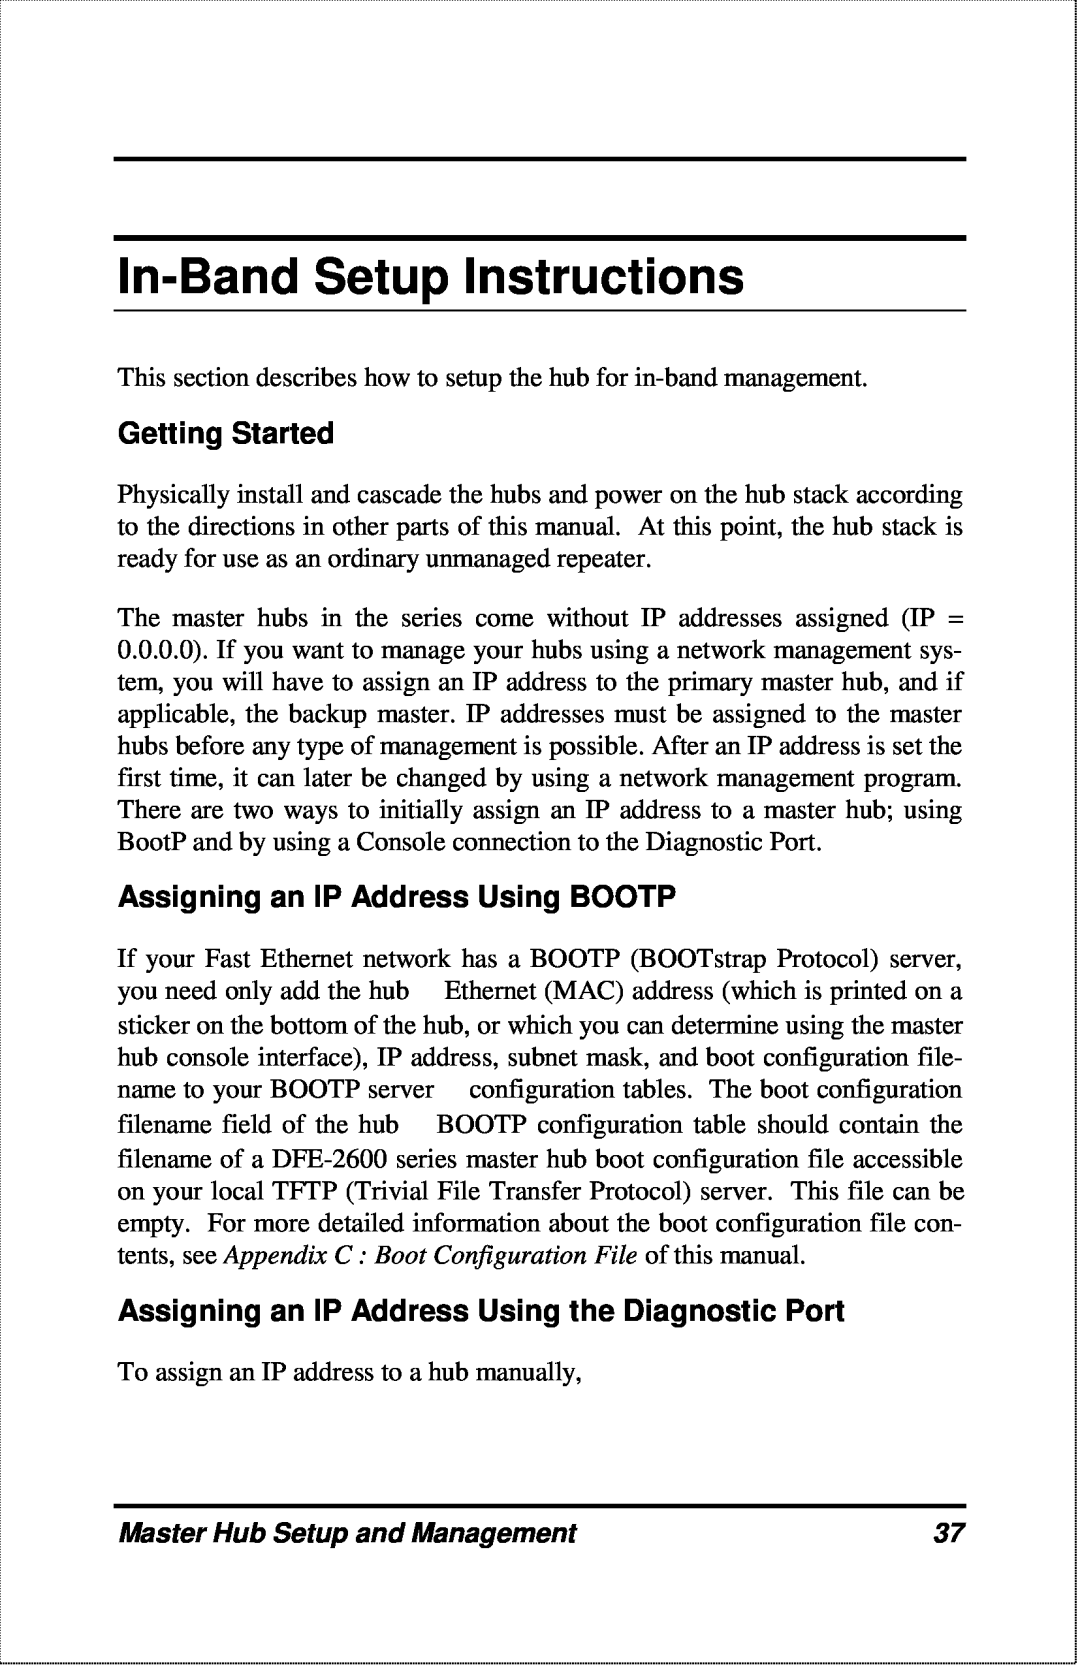 D-Link DFE-2600 manual In-Band Setup Instructions, Getting Started, Assigning an IP Address Using BOOTP 